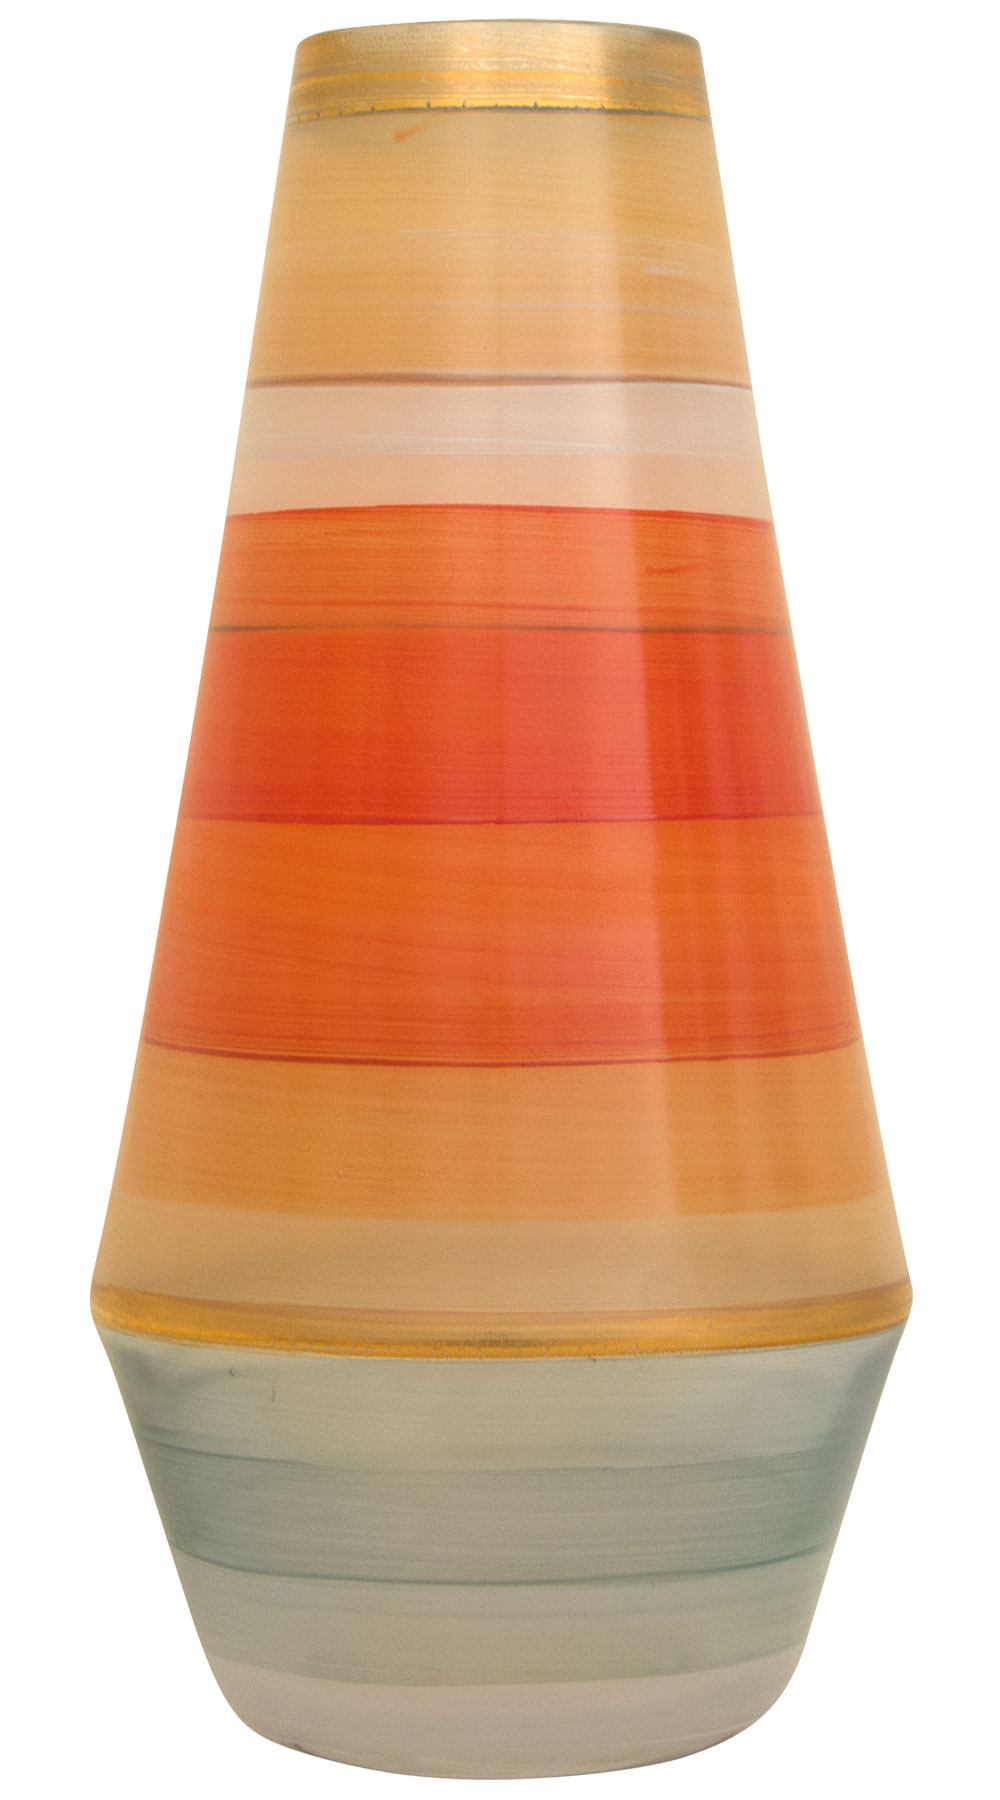 Glass vase "Sunny" with gold decoration (conical)